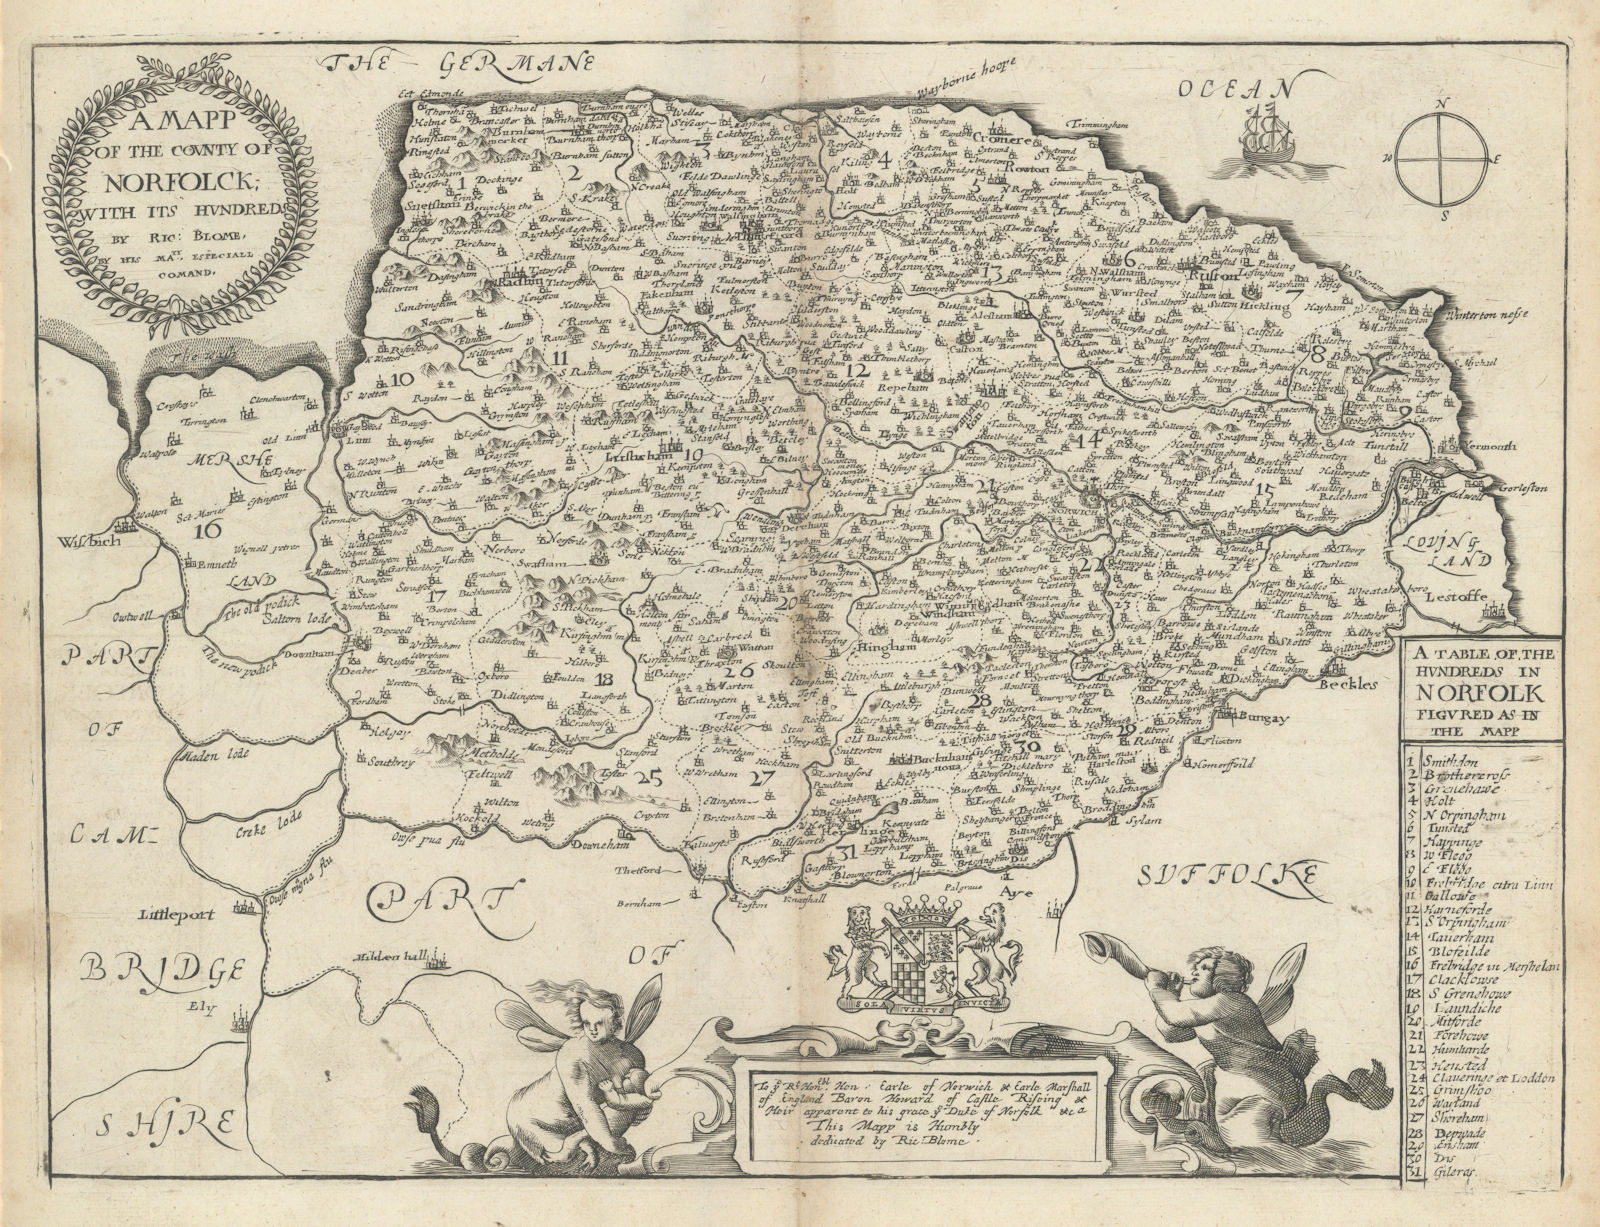 A Mapp of the County of Norfolck with its hundreds by Richard Blome 1673